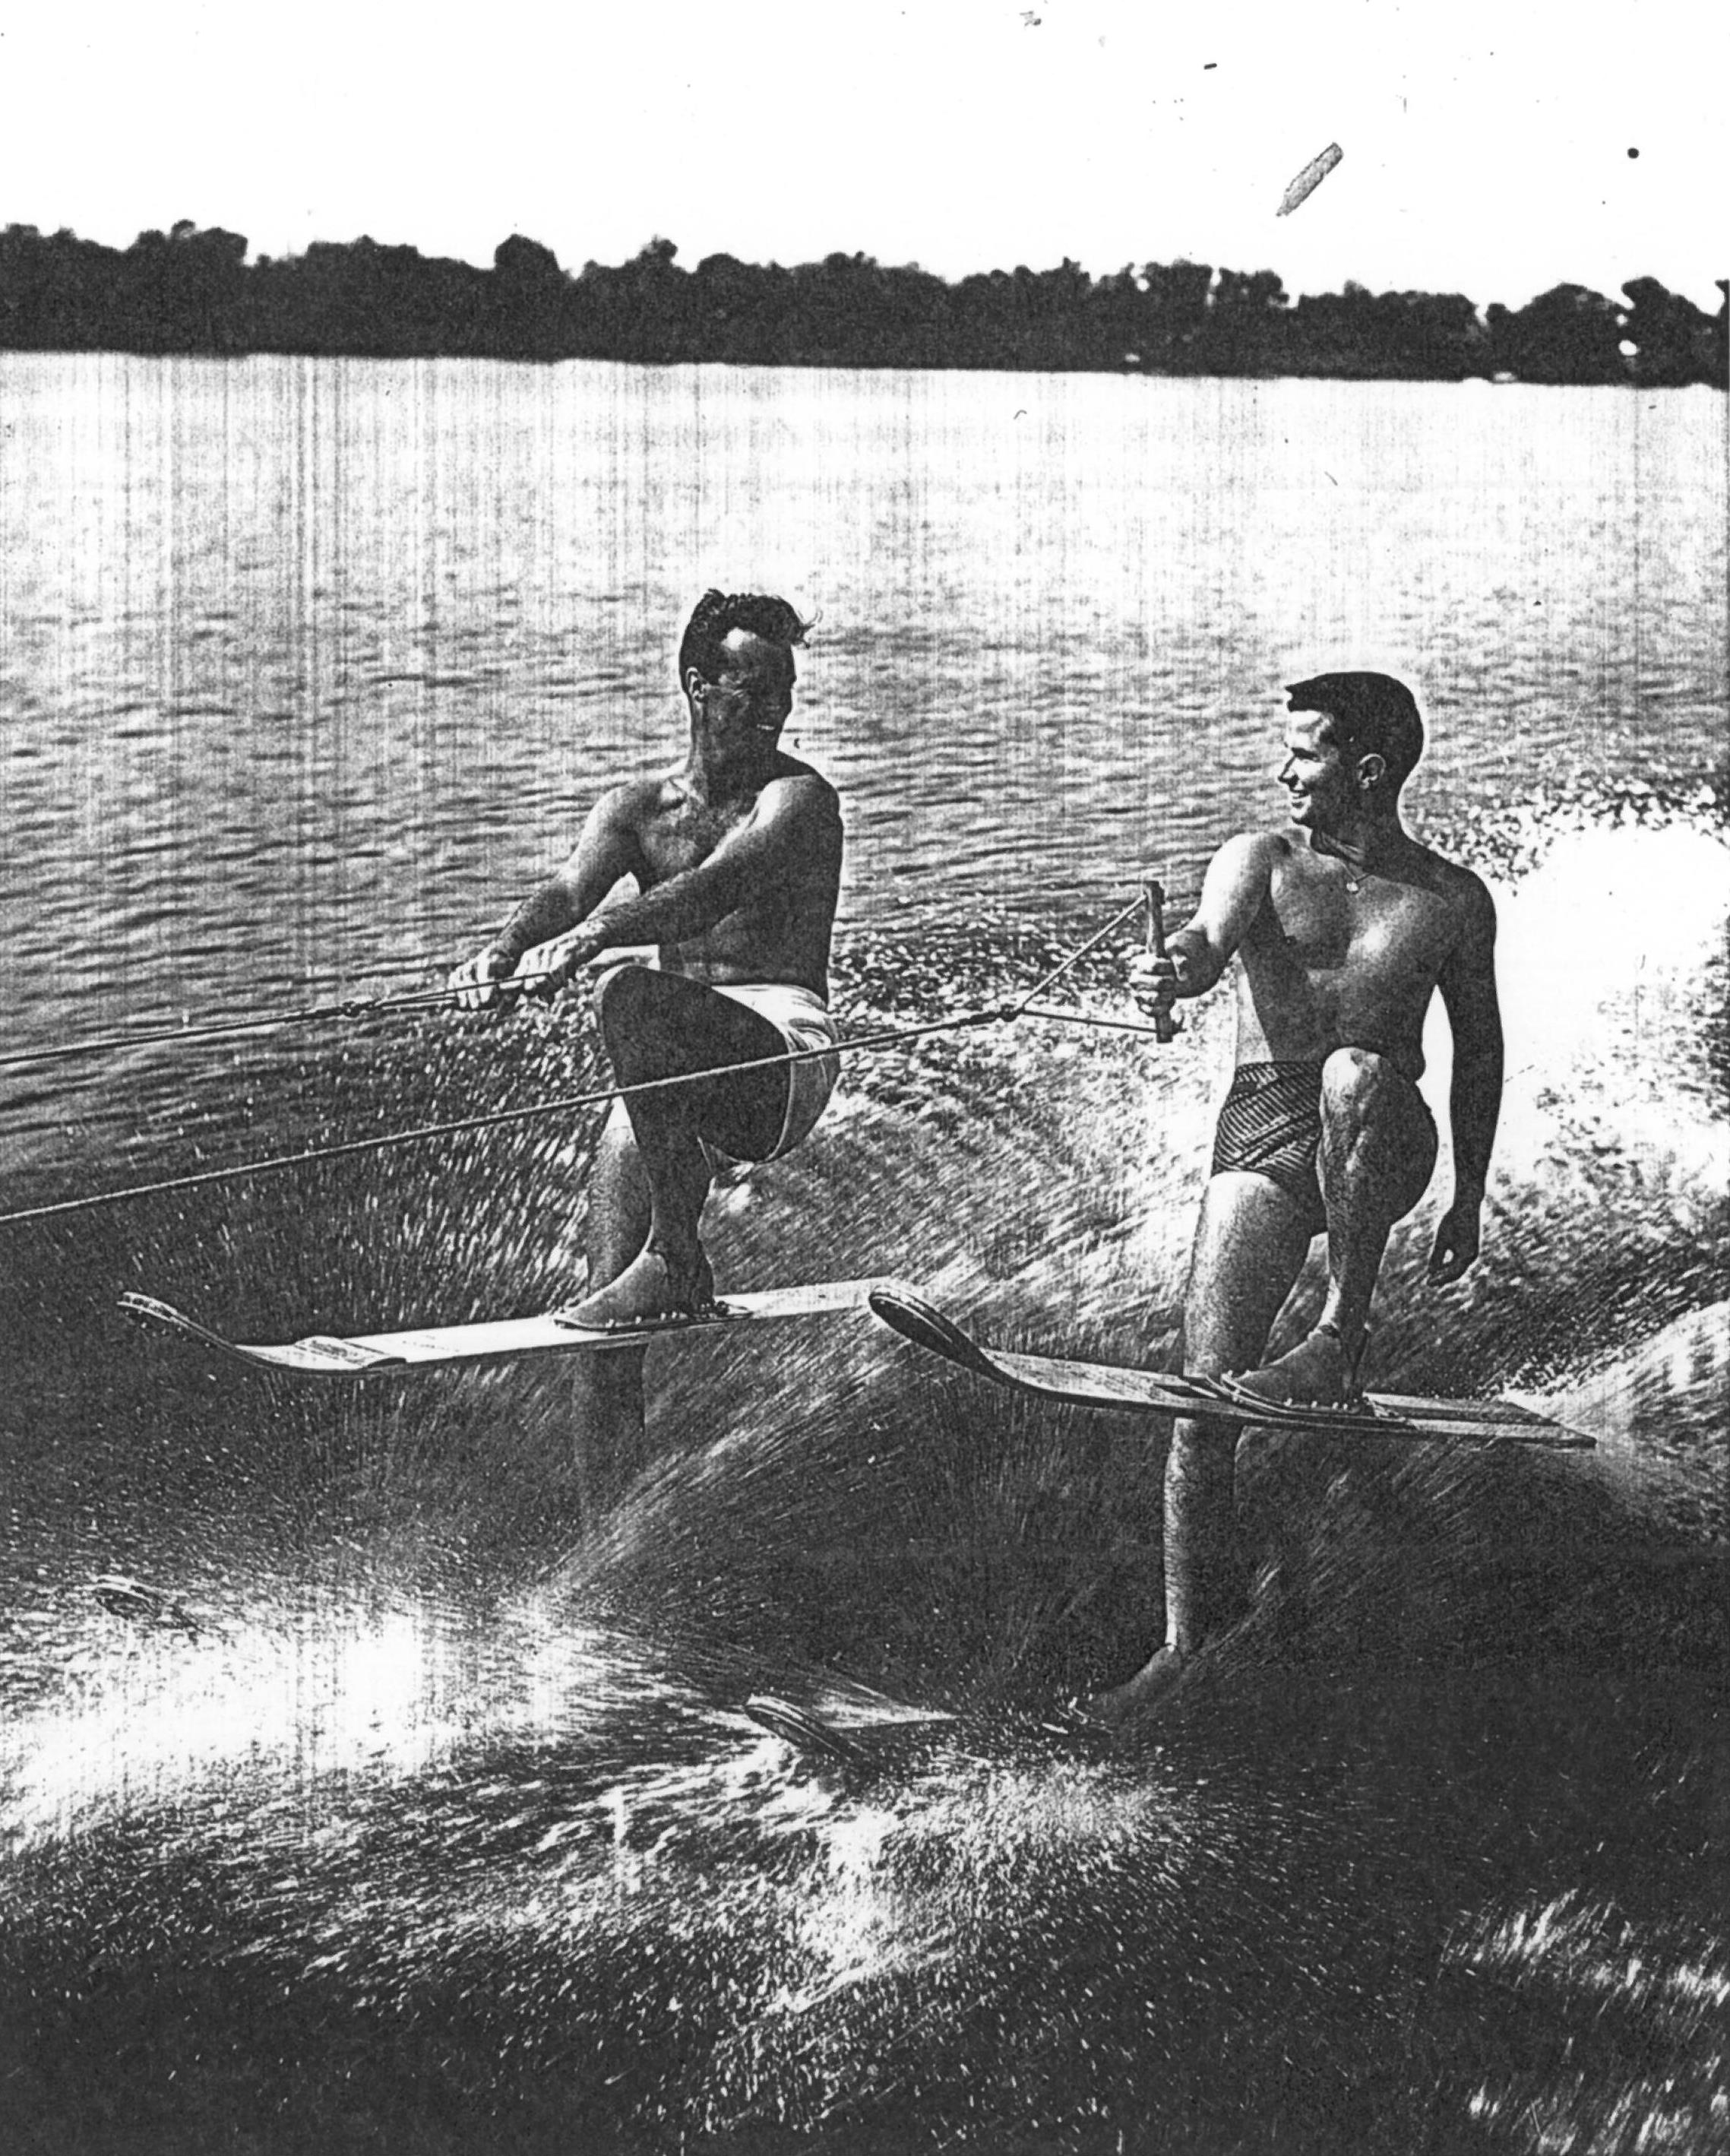  Bob skiing with Dick Pope, Jr.  Dick Pope, Jr., (Dec. 12, 1930–Nov. 8, 2007), was a World Champion  water skier  and an important business leader in Central Florida. An important innovator in the sport of water skiing, Pope developed  barefoot skiin